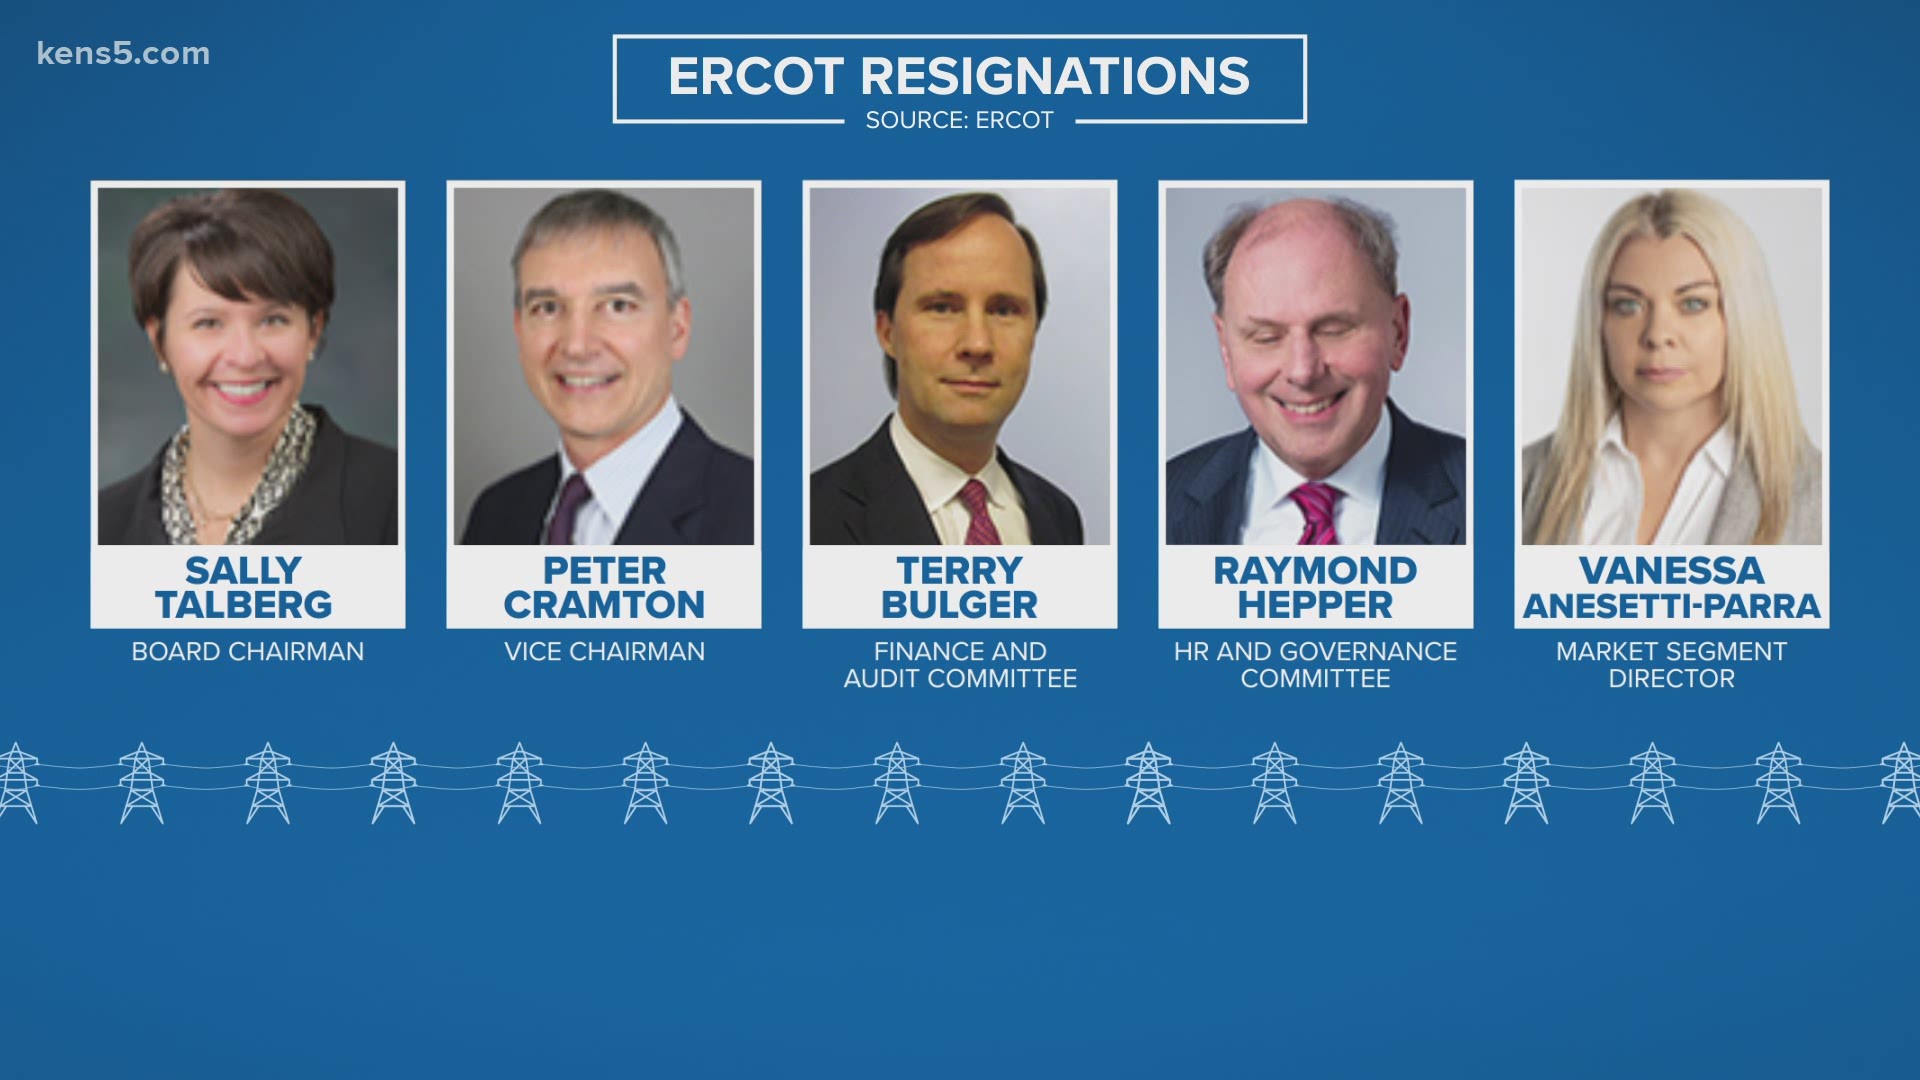 Sally Talberg, Peter Cramton, Terry Bulger and Raymond Hepper will resign at the end of the ERCOT board meeting Wednesday morning, according to a public notice.